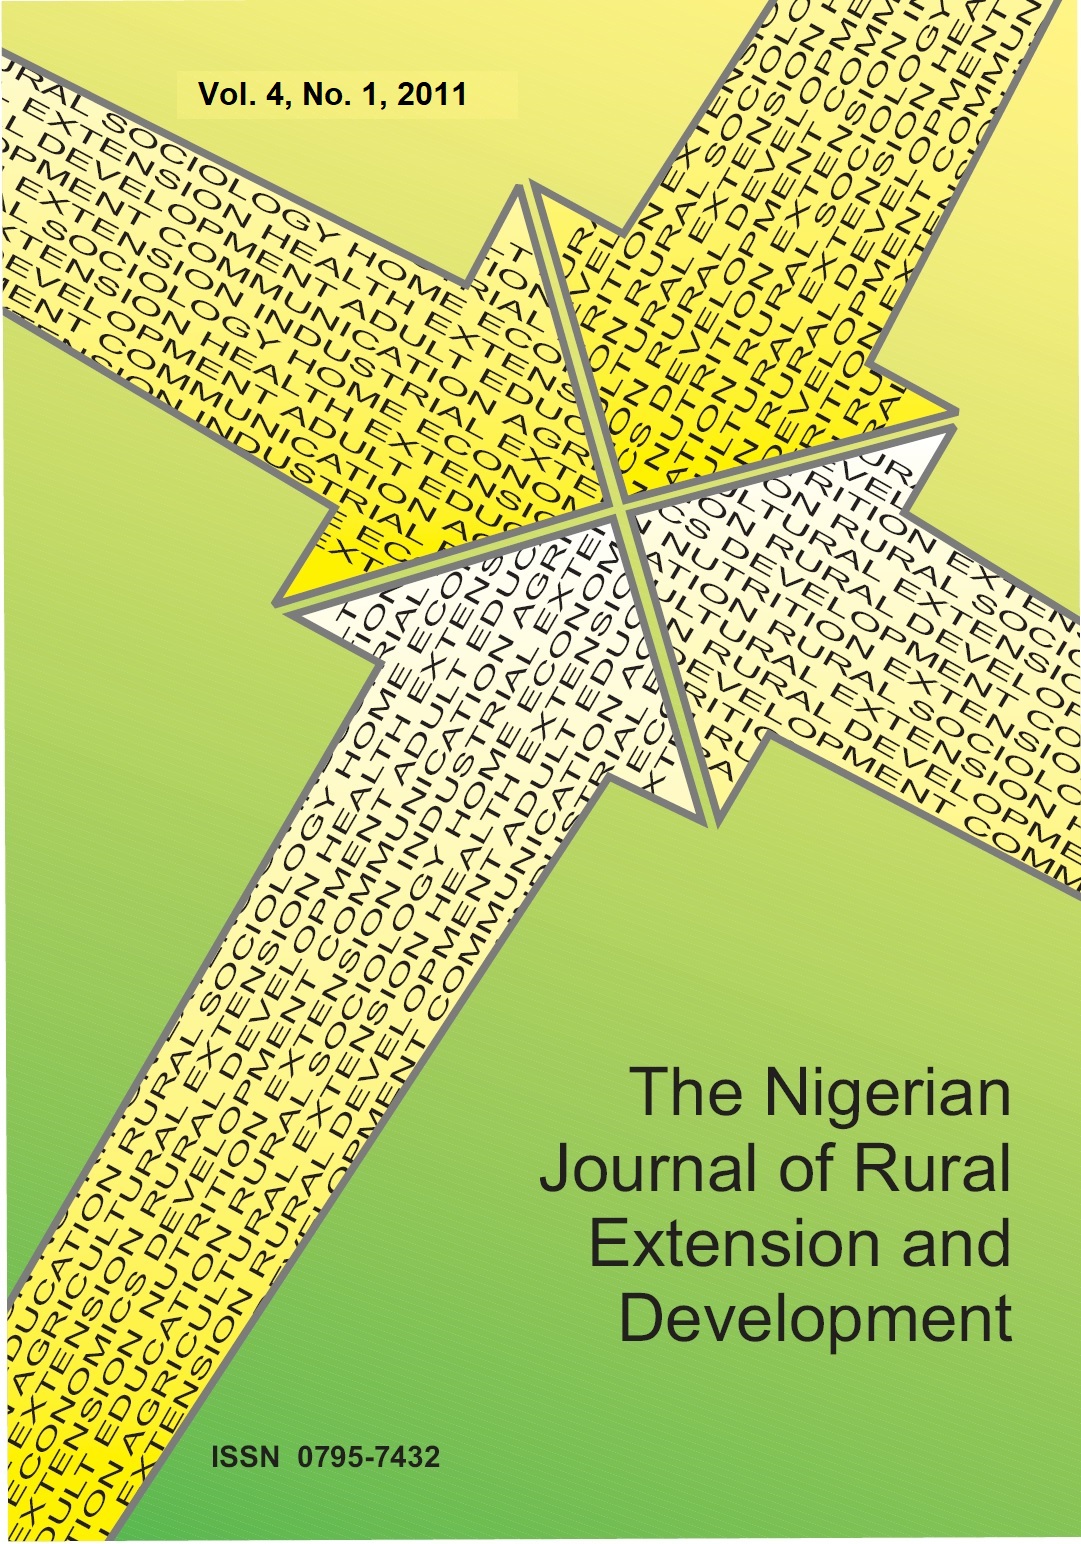 					View Vol. 4 No. 1 (2011): Nigerian Journal of Rural Extension and Development (NJRED)
				